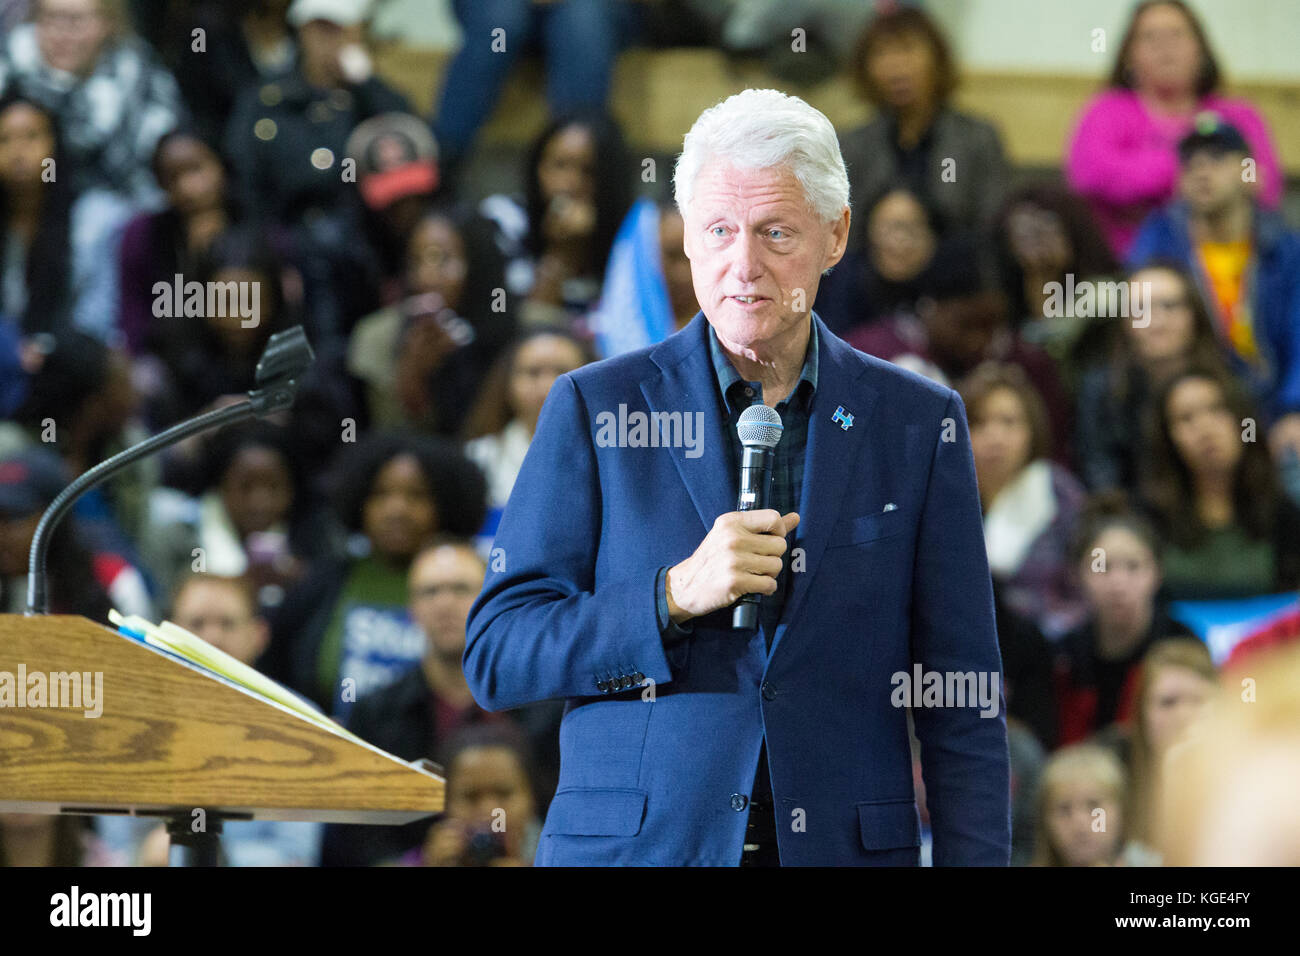 Reading, PA - October 28, 2016: Former US President Clinton campaigns at a Democrat rally for his wife Hillary at Albright College in Berks County. Stock Photo